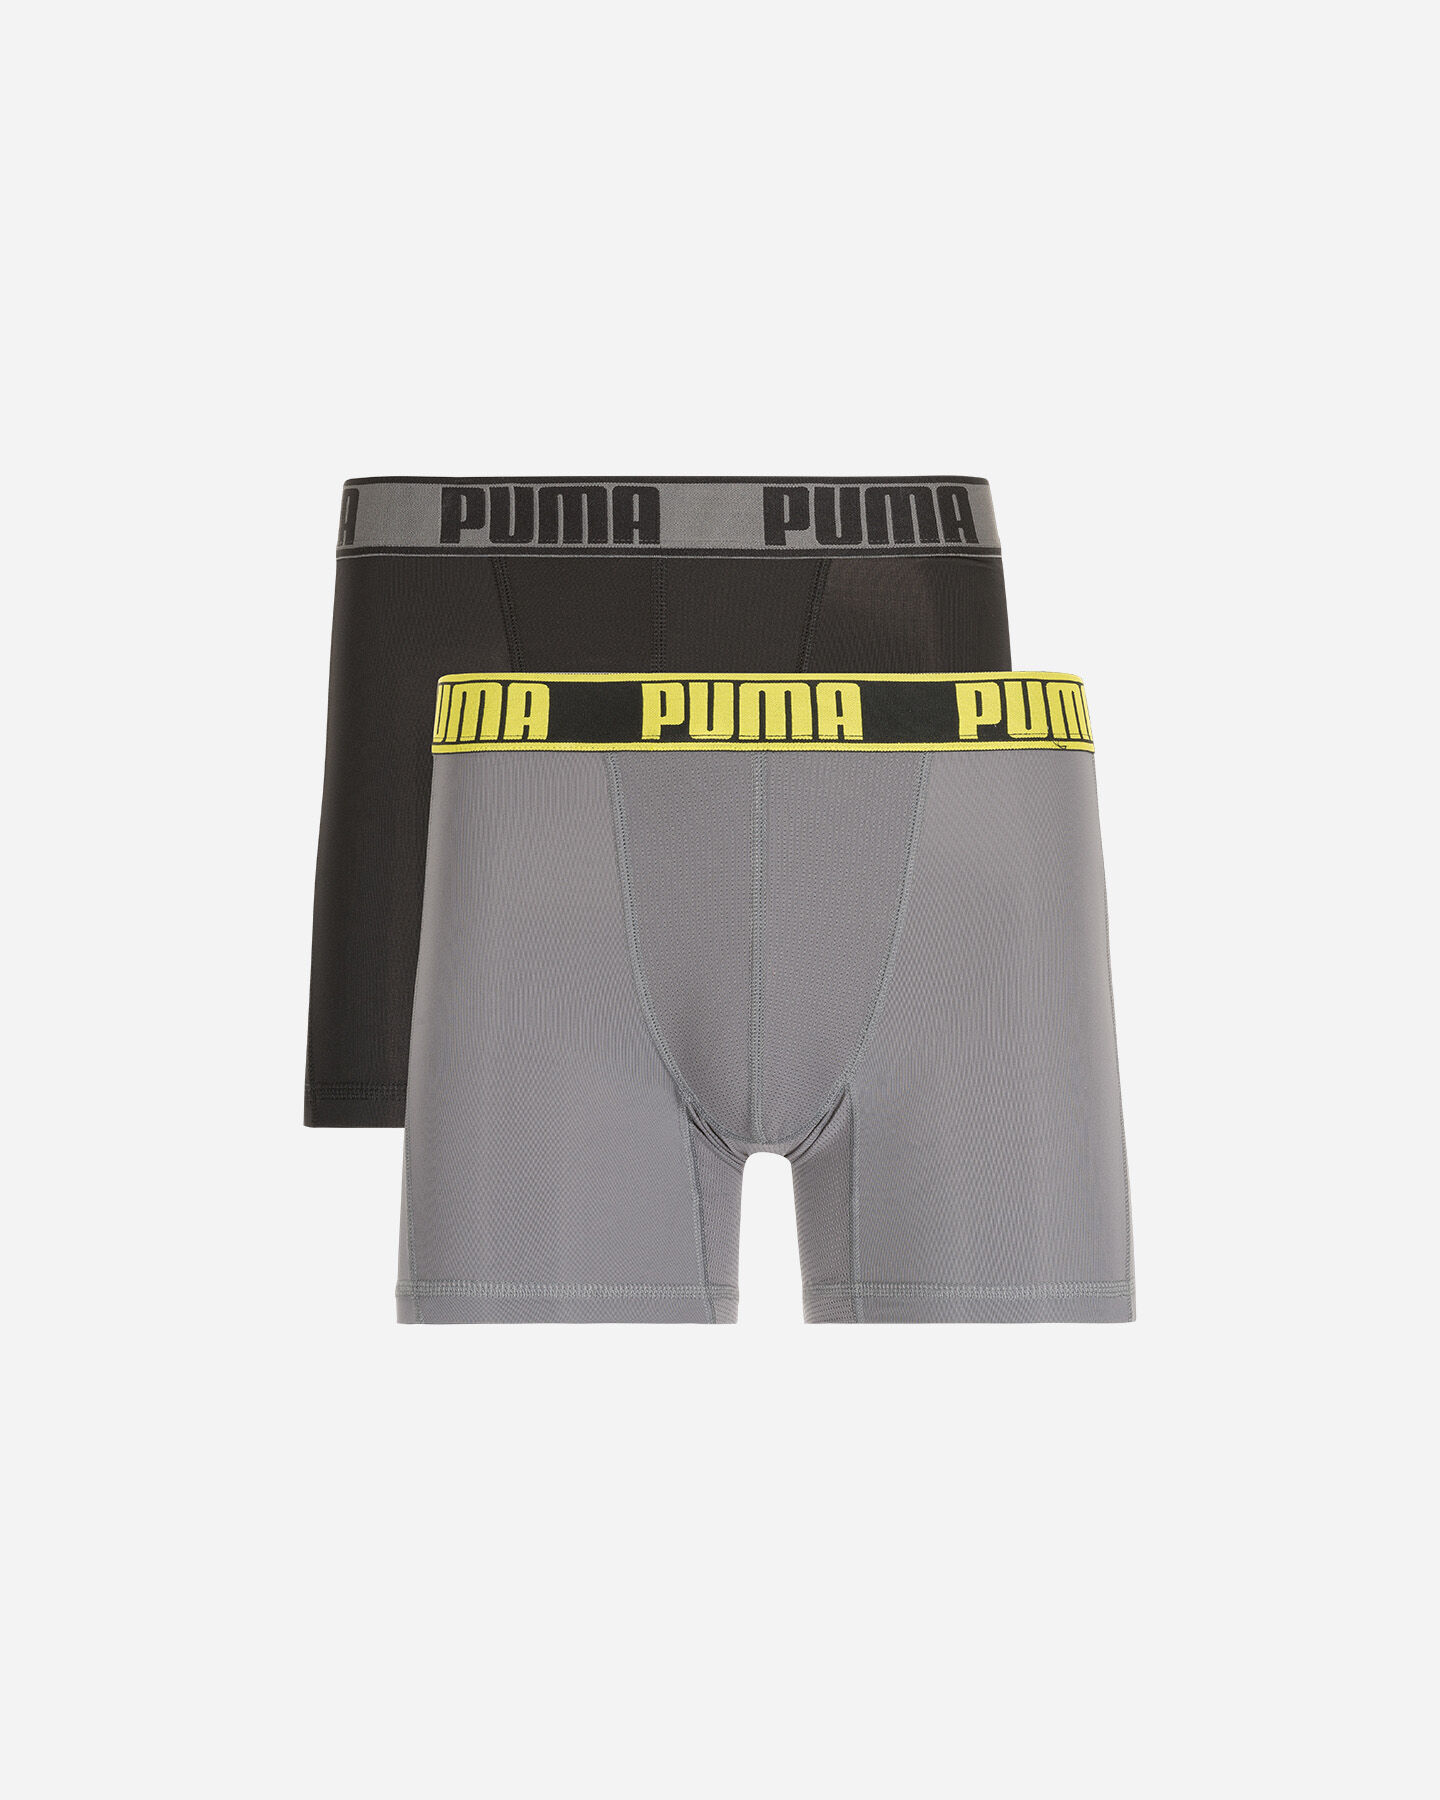  Intimo PUMA 2 PACK BOXER ACTIVE PACKED M S4076476|319|040 scatto 0